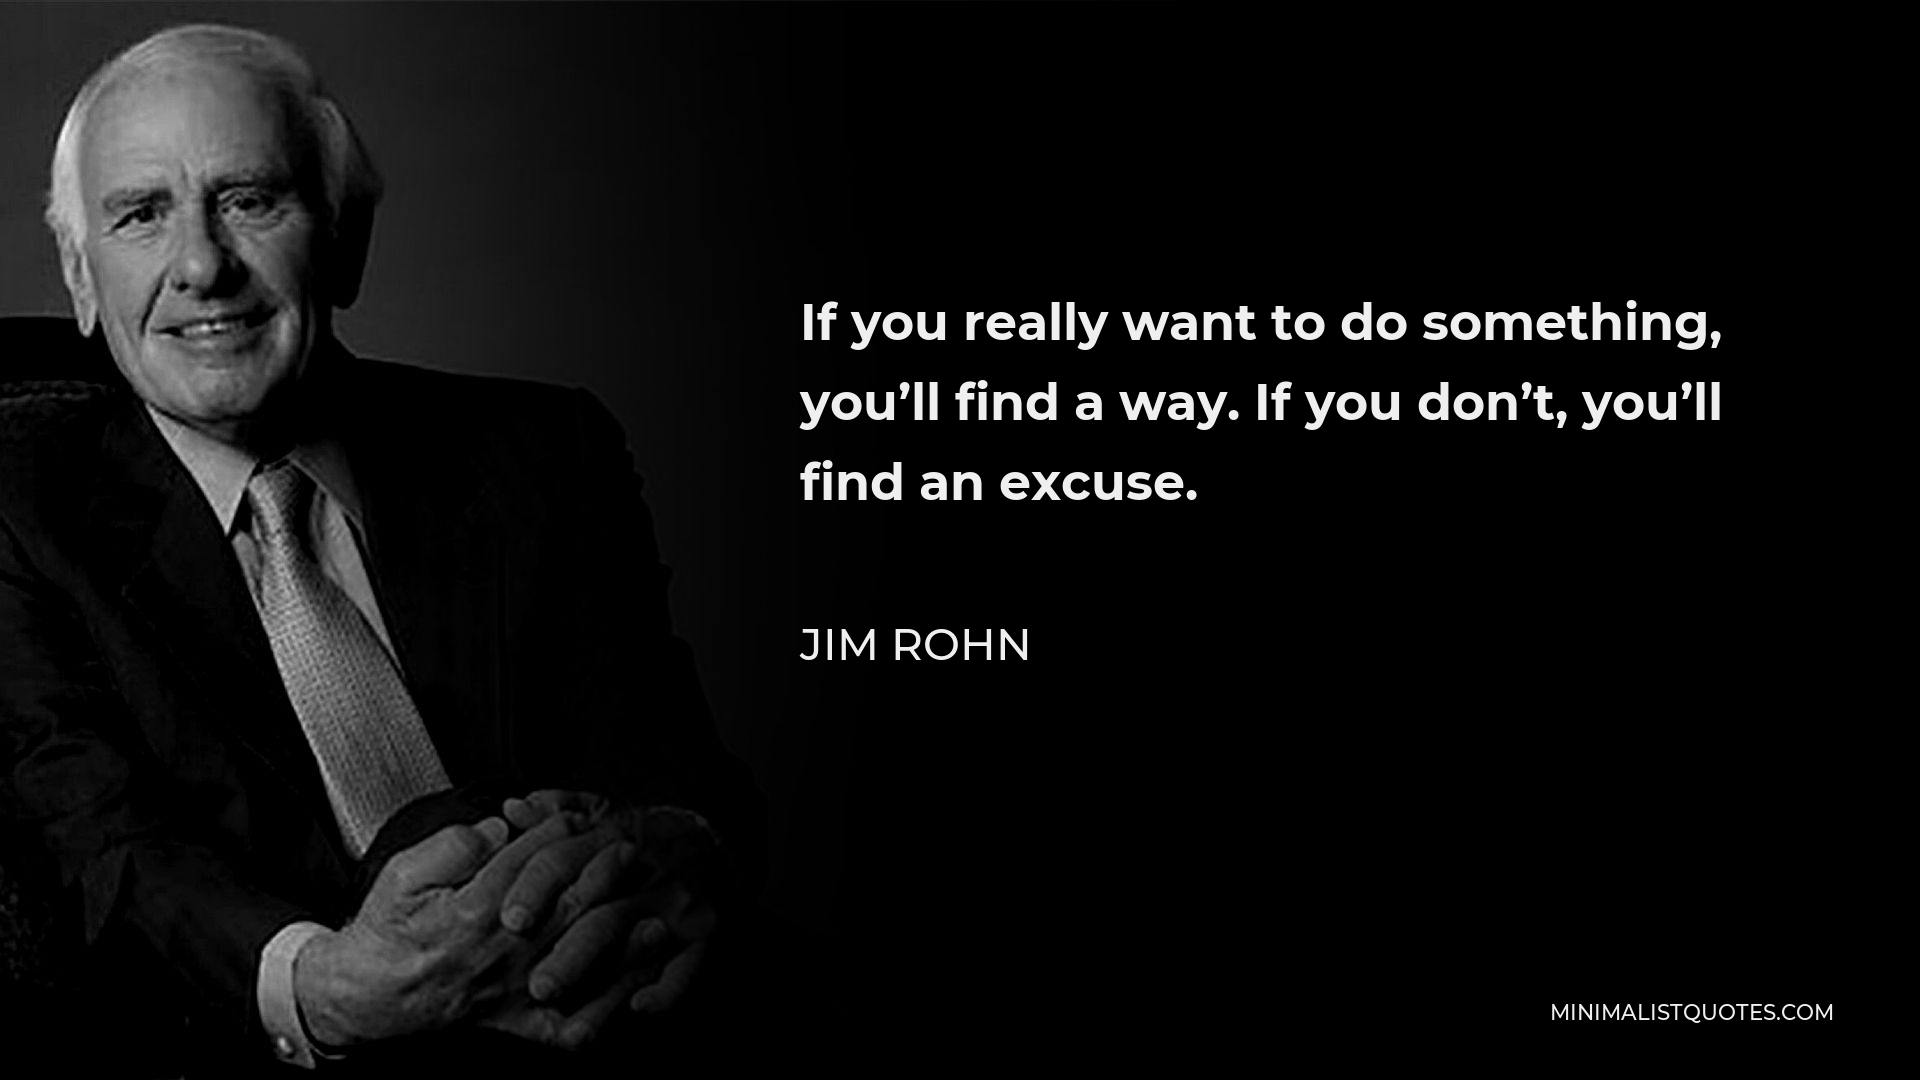 Jim Rohn Quote - If you really want to do something, you’ll find a way. If you don’t, you’ll find an excuse.